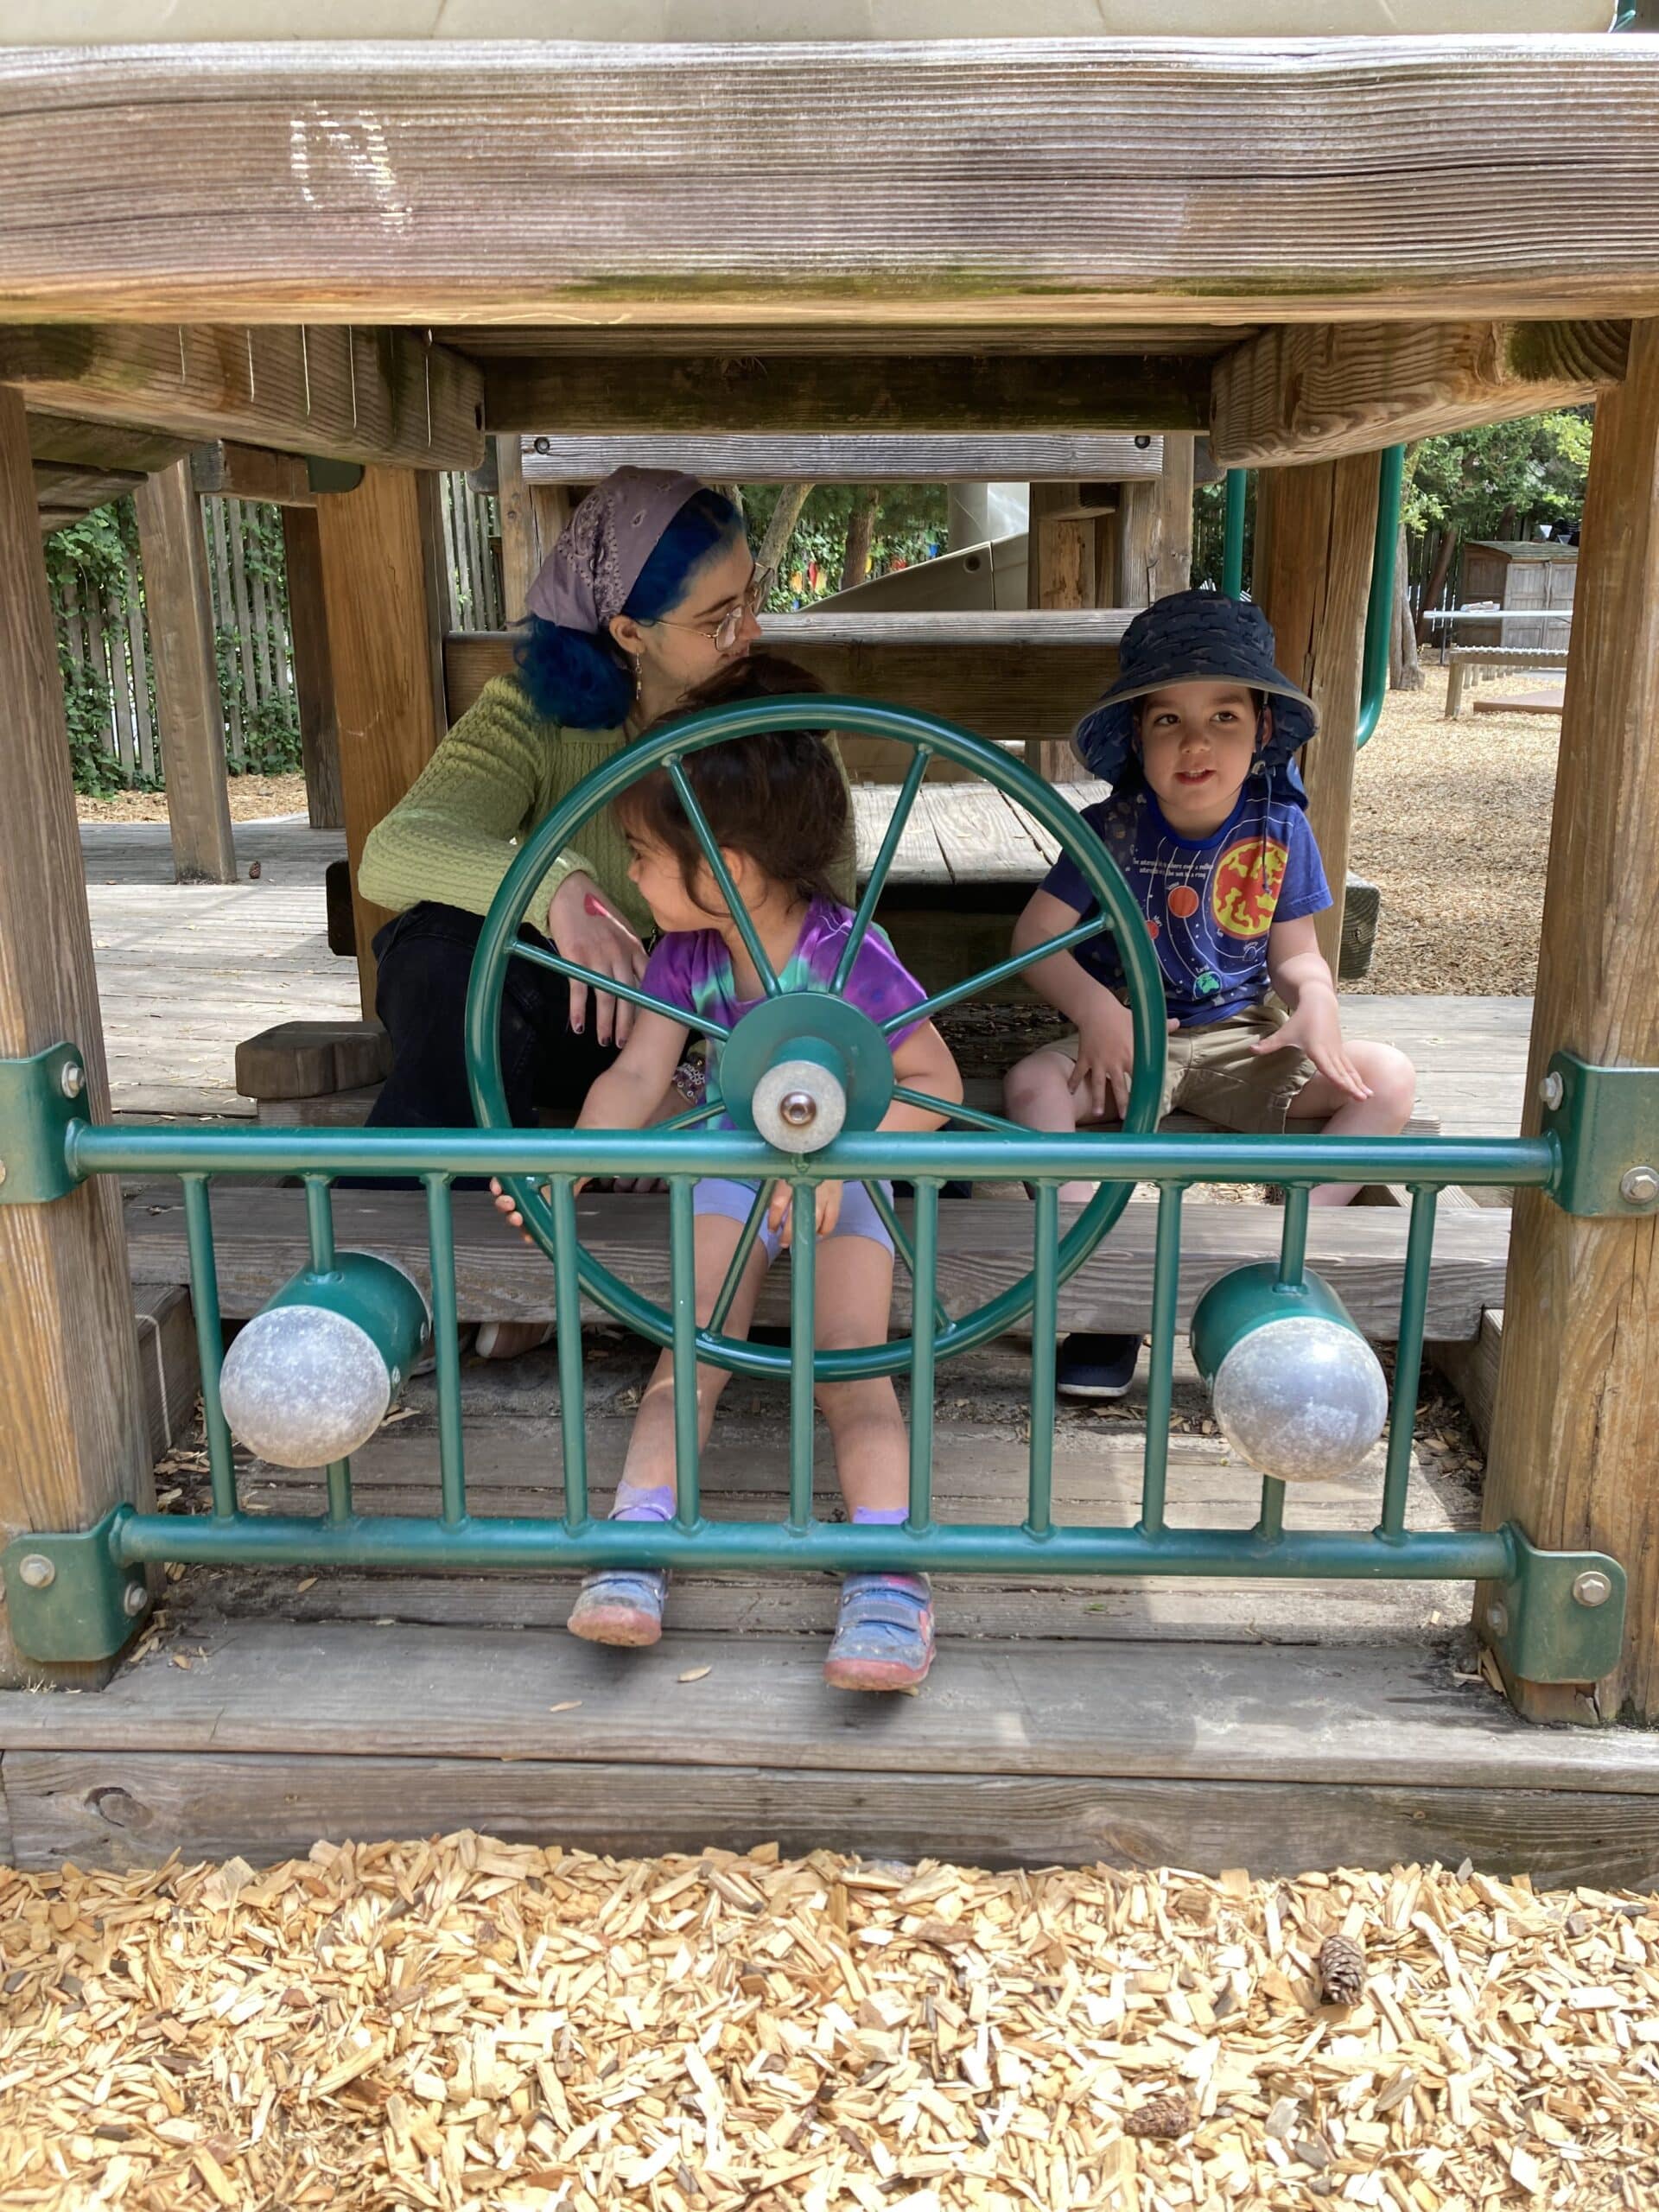 Two campers and a counsellor sit in a life size wooden train in the playground